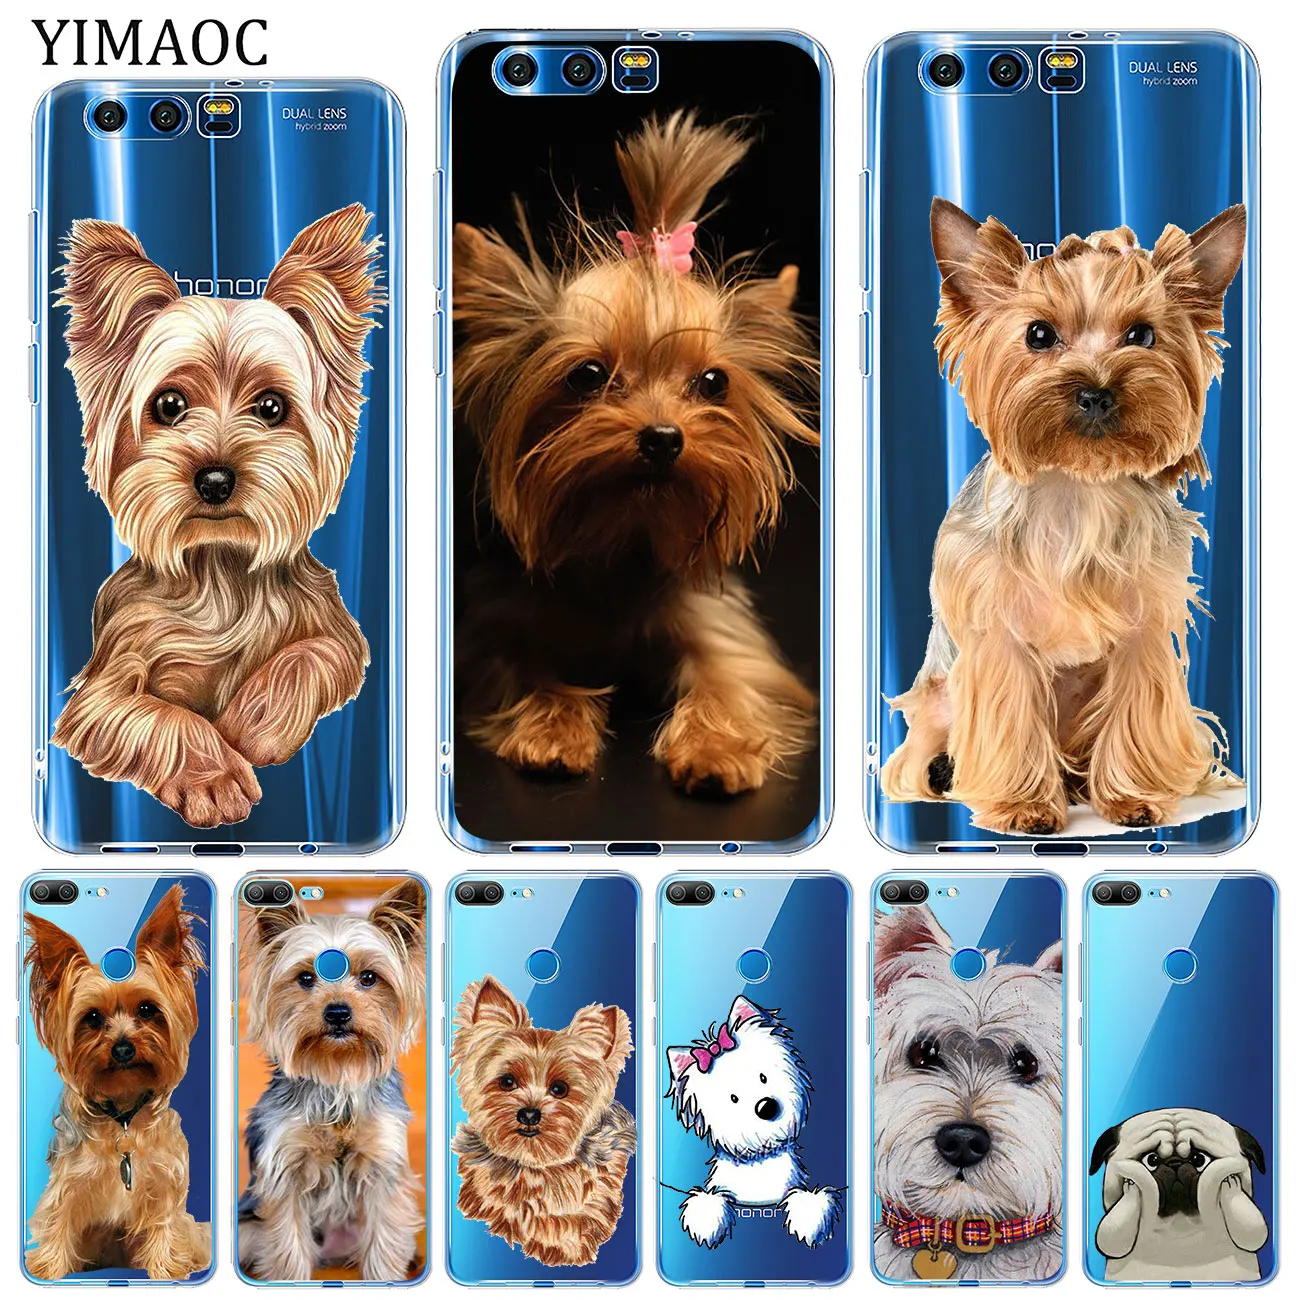 

YIMAOC yorkshire terrier dog puppy Soft Silicone Case for Huawei Y9 Y7 Y6 Prime 2018 Honor 20 10 9 9X 8C 8X 8 Lite 7X 7C 7A Pro